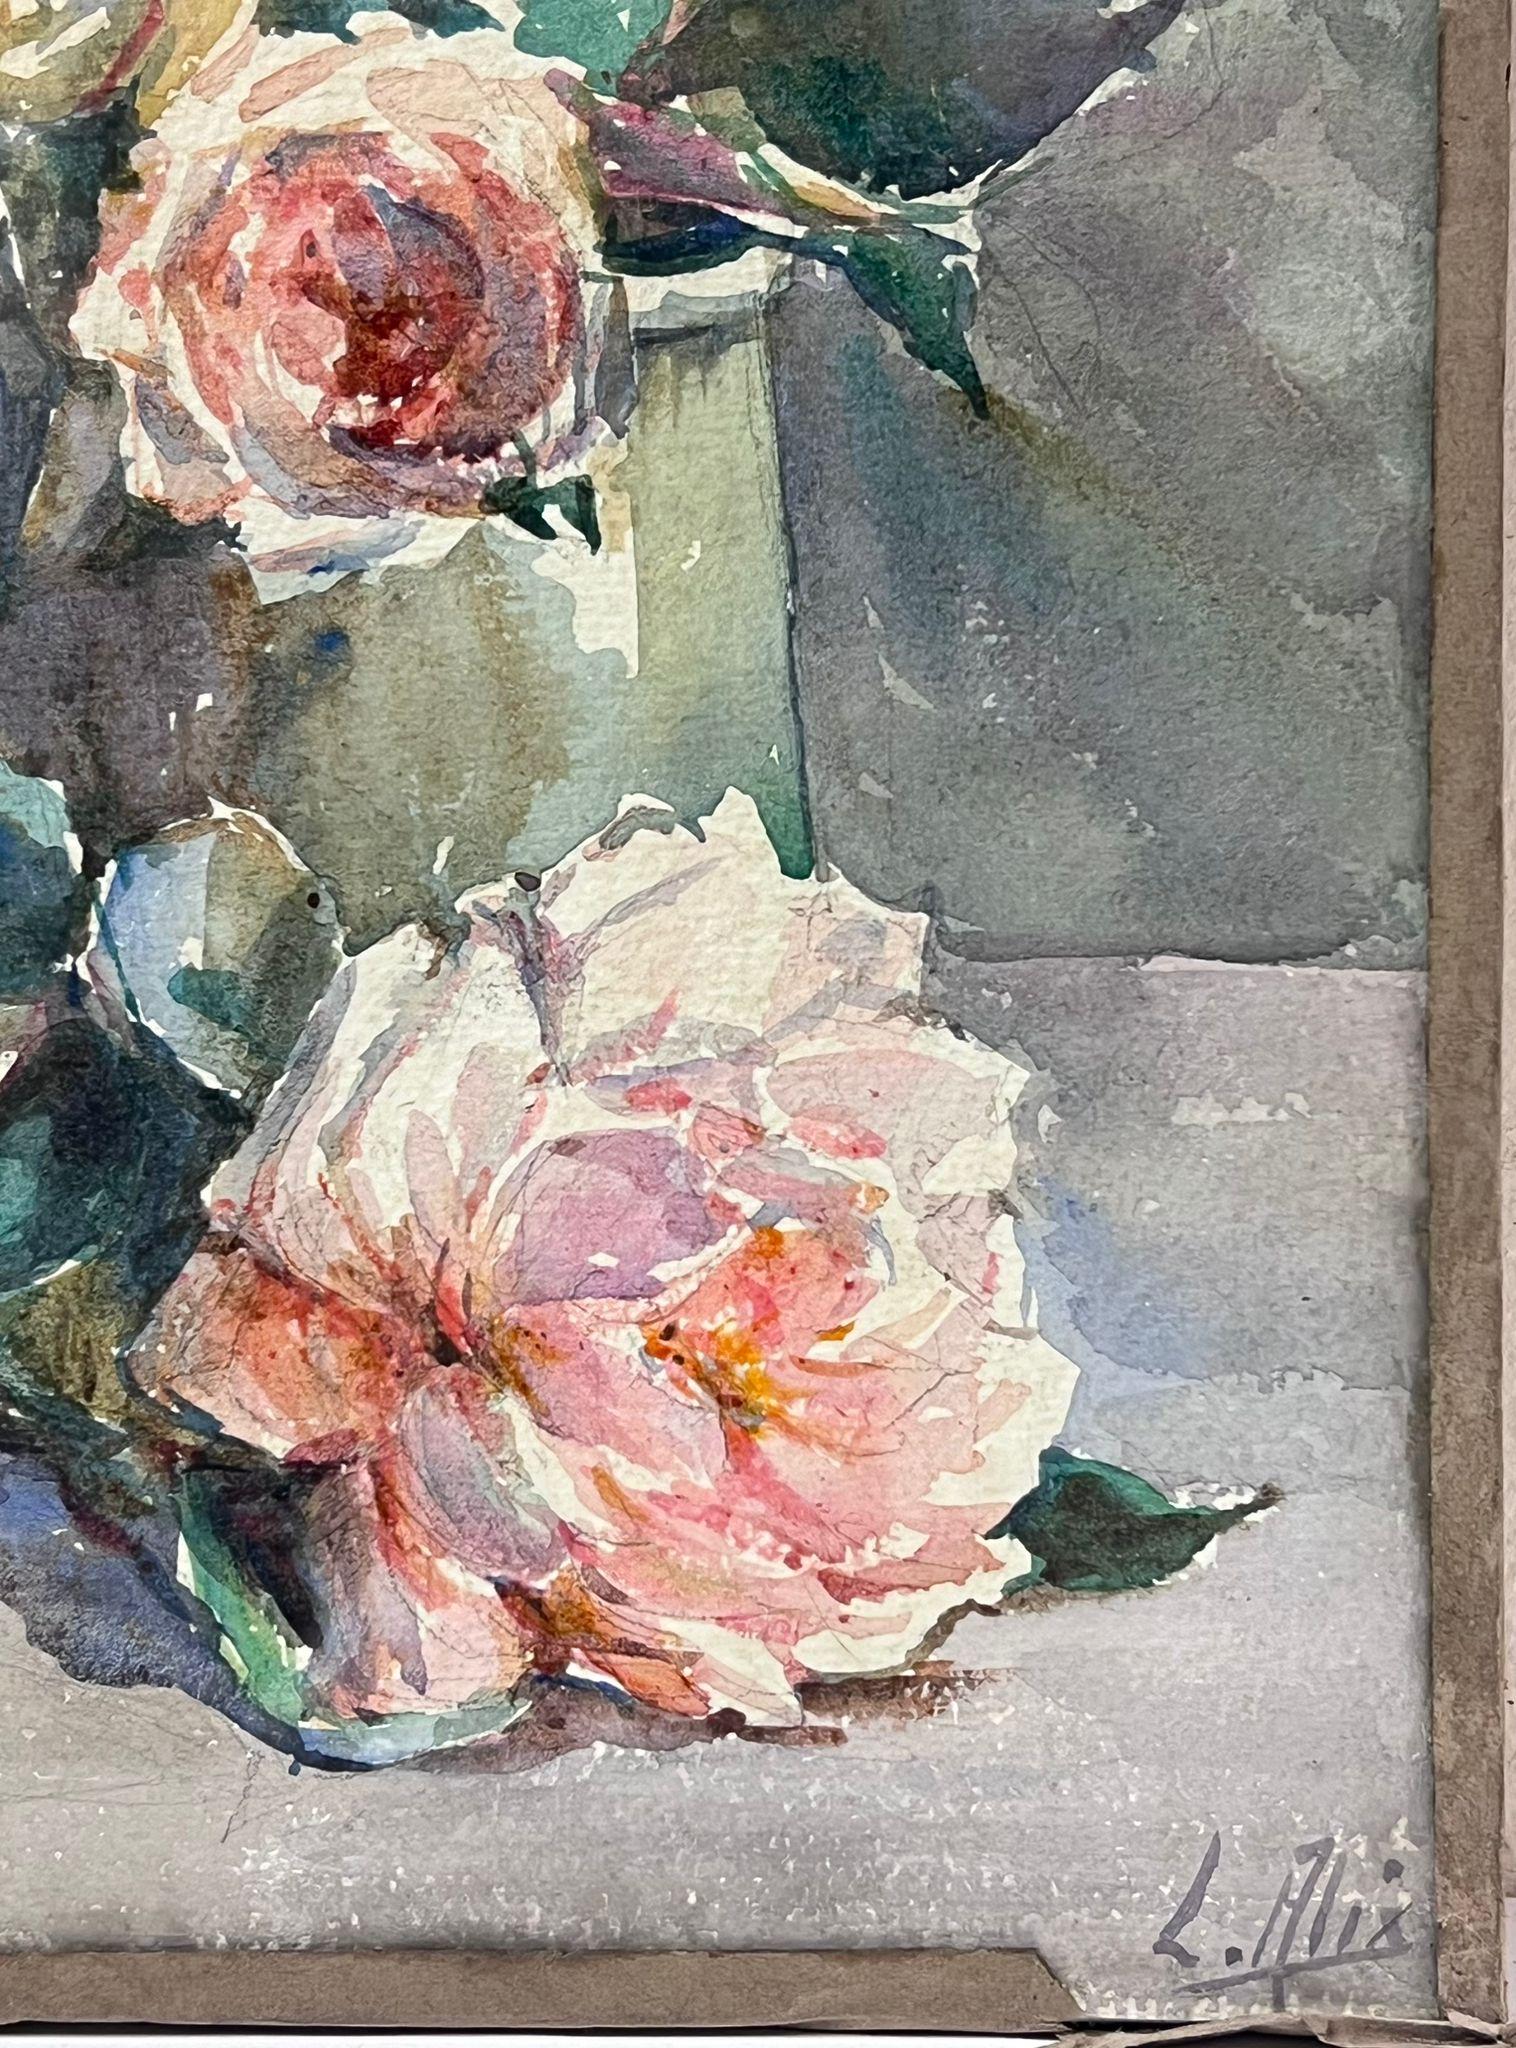 Flowers In Vase
signed by Louise Alix, French 1950's Impressionist 
watercolour on artist paper stuck on board, unframed. 
painting: 11.75 x 10 inches
provenance: from a large private collection of this artists work in Northern France
condition: